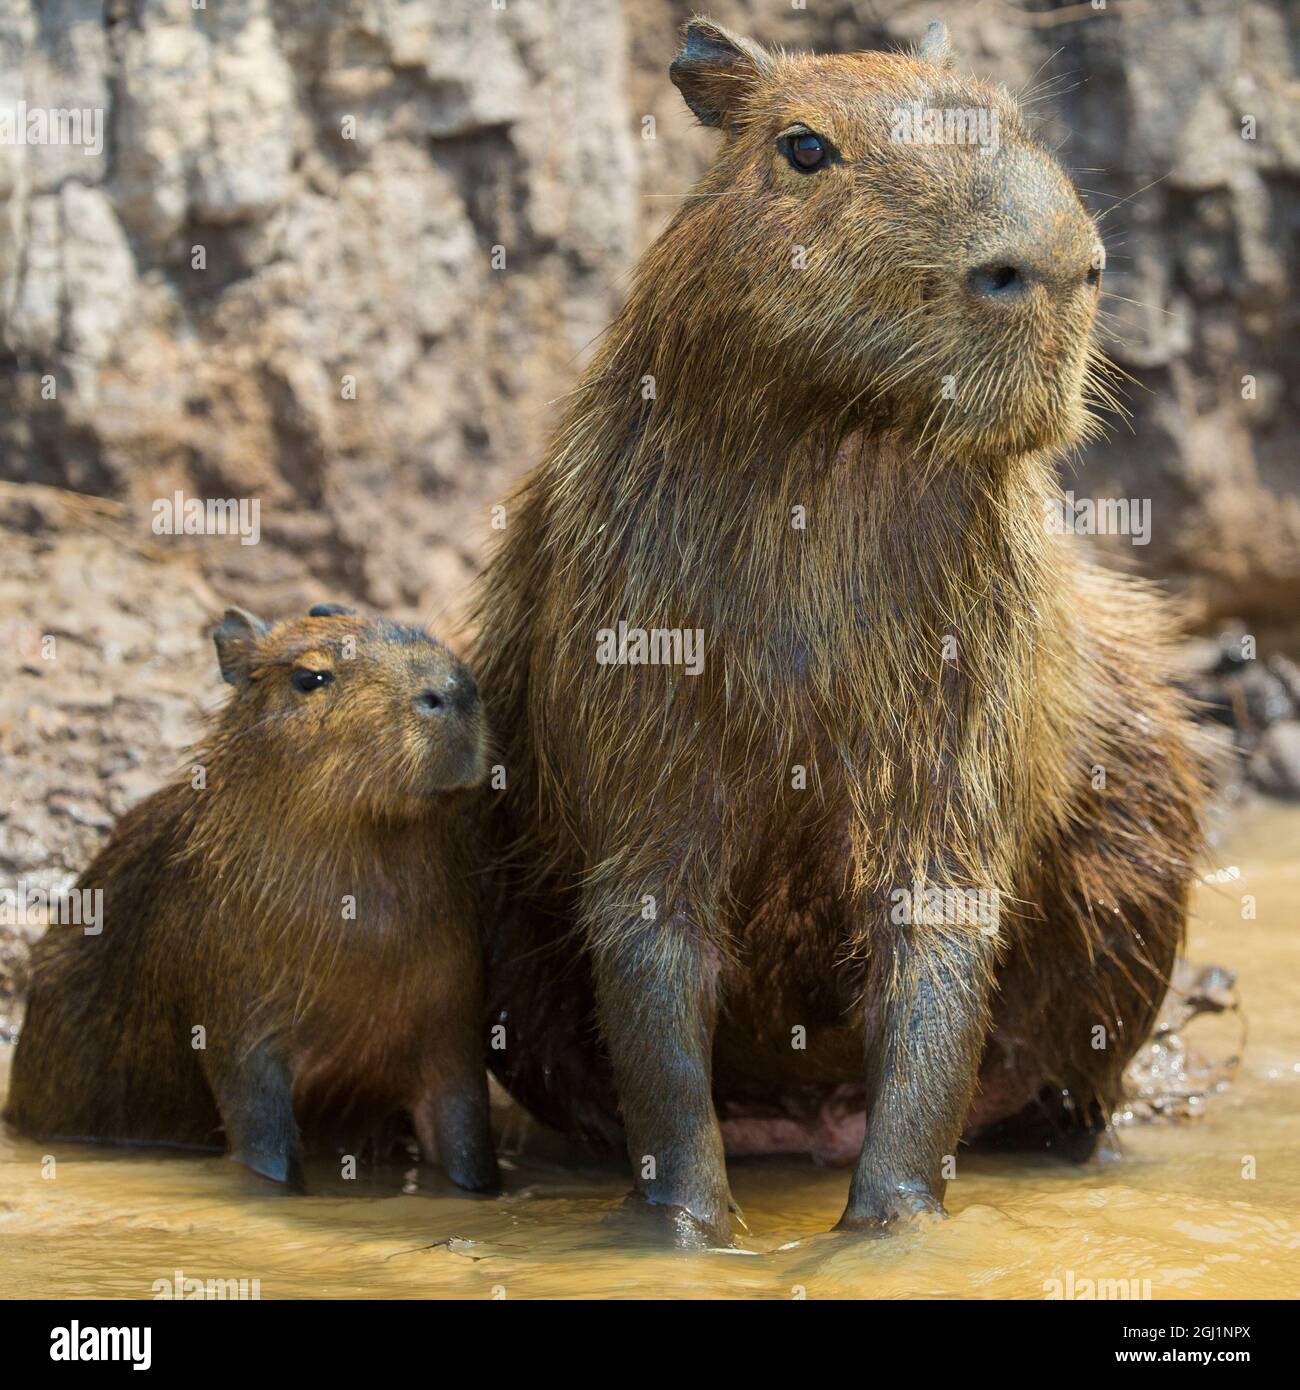 South America. Brazil. A capybara (Hydrochoerus hydrochaeris) is a rodent commonly found in the Pantanal, the world's largest tropical wetland area, a Stock Photo